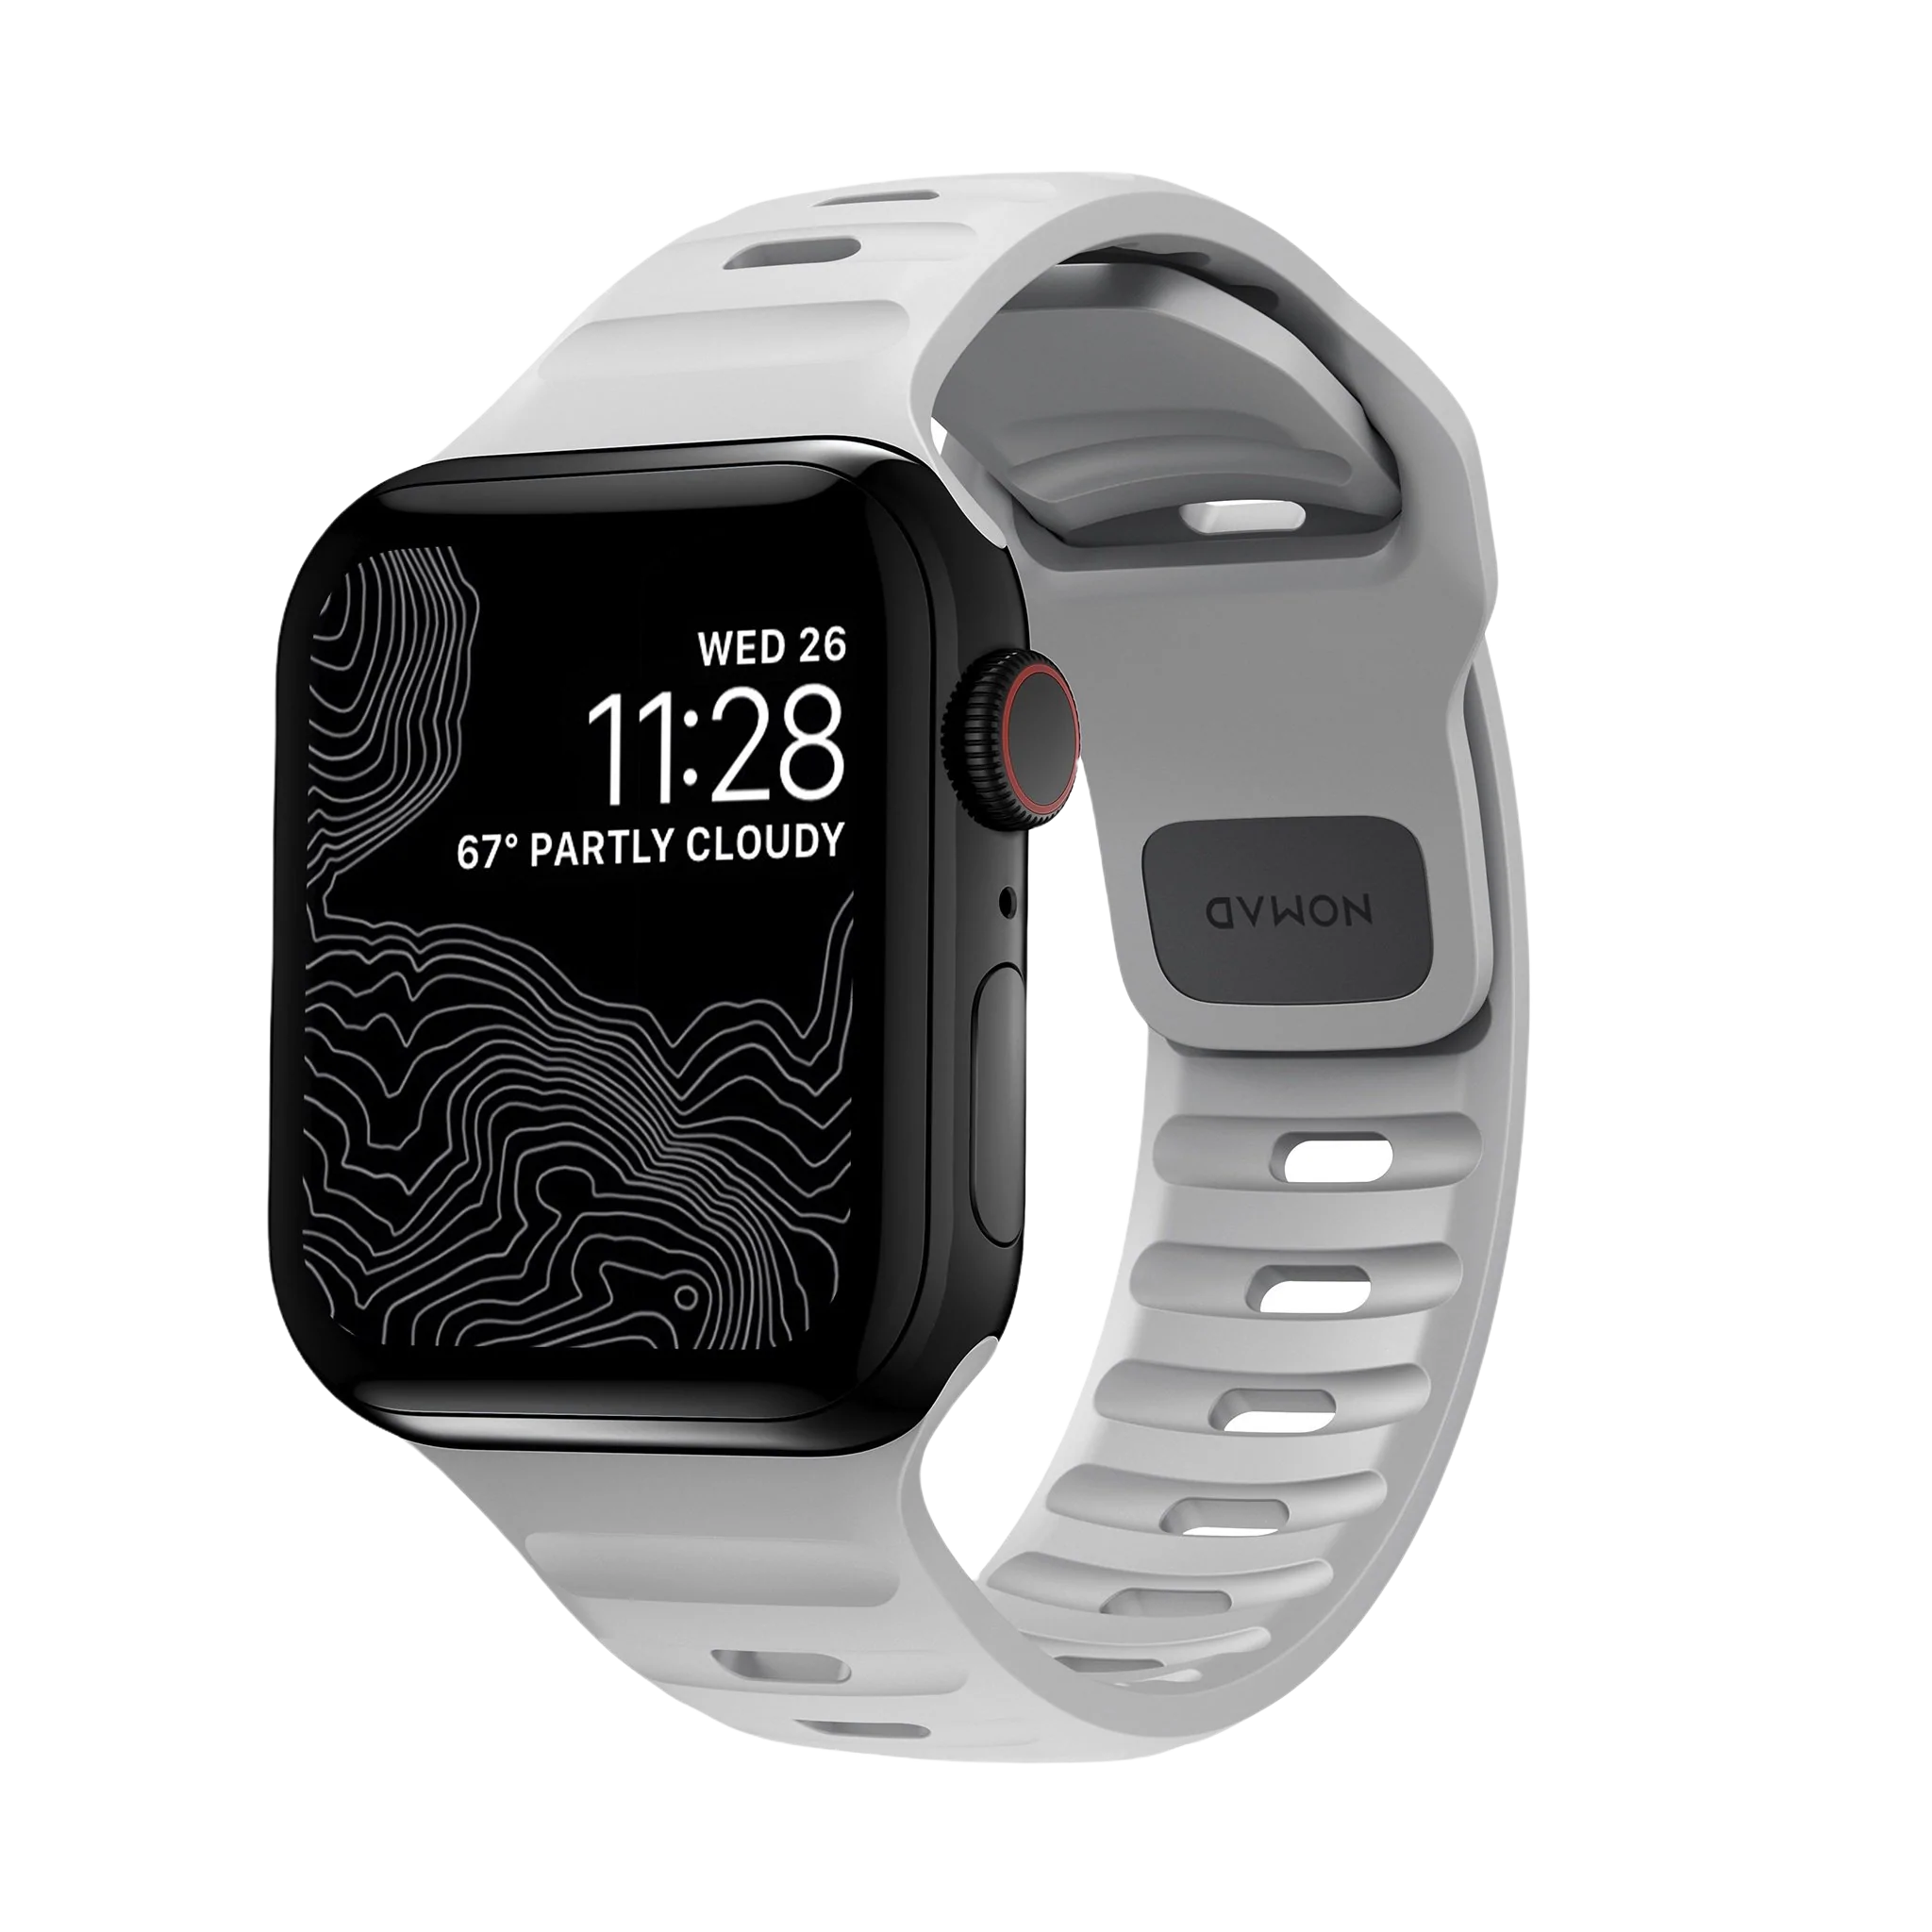 The Apple Watch Guide Megamac